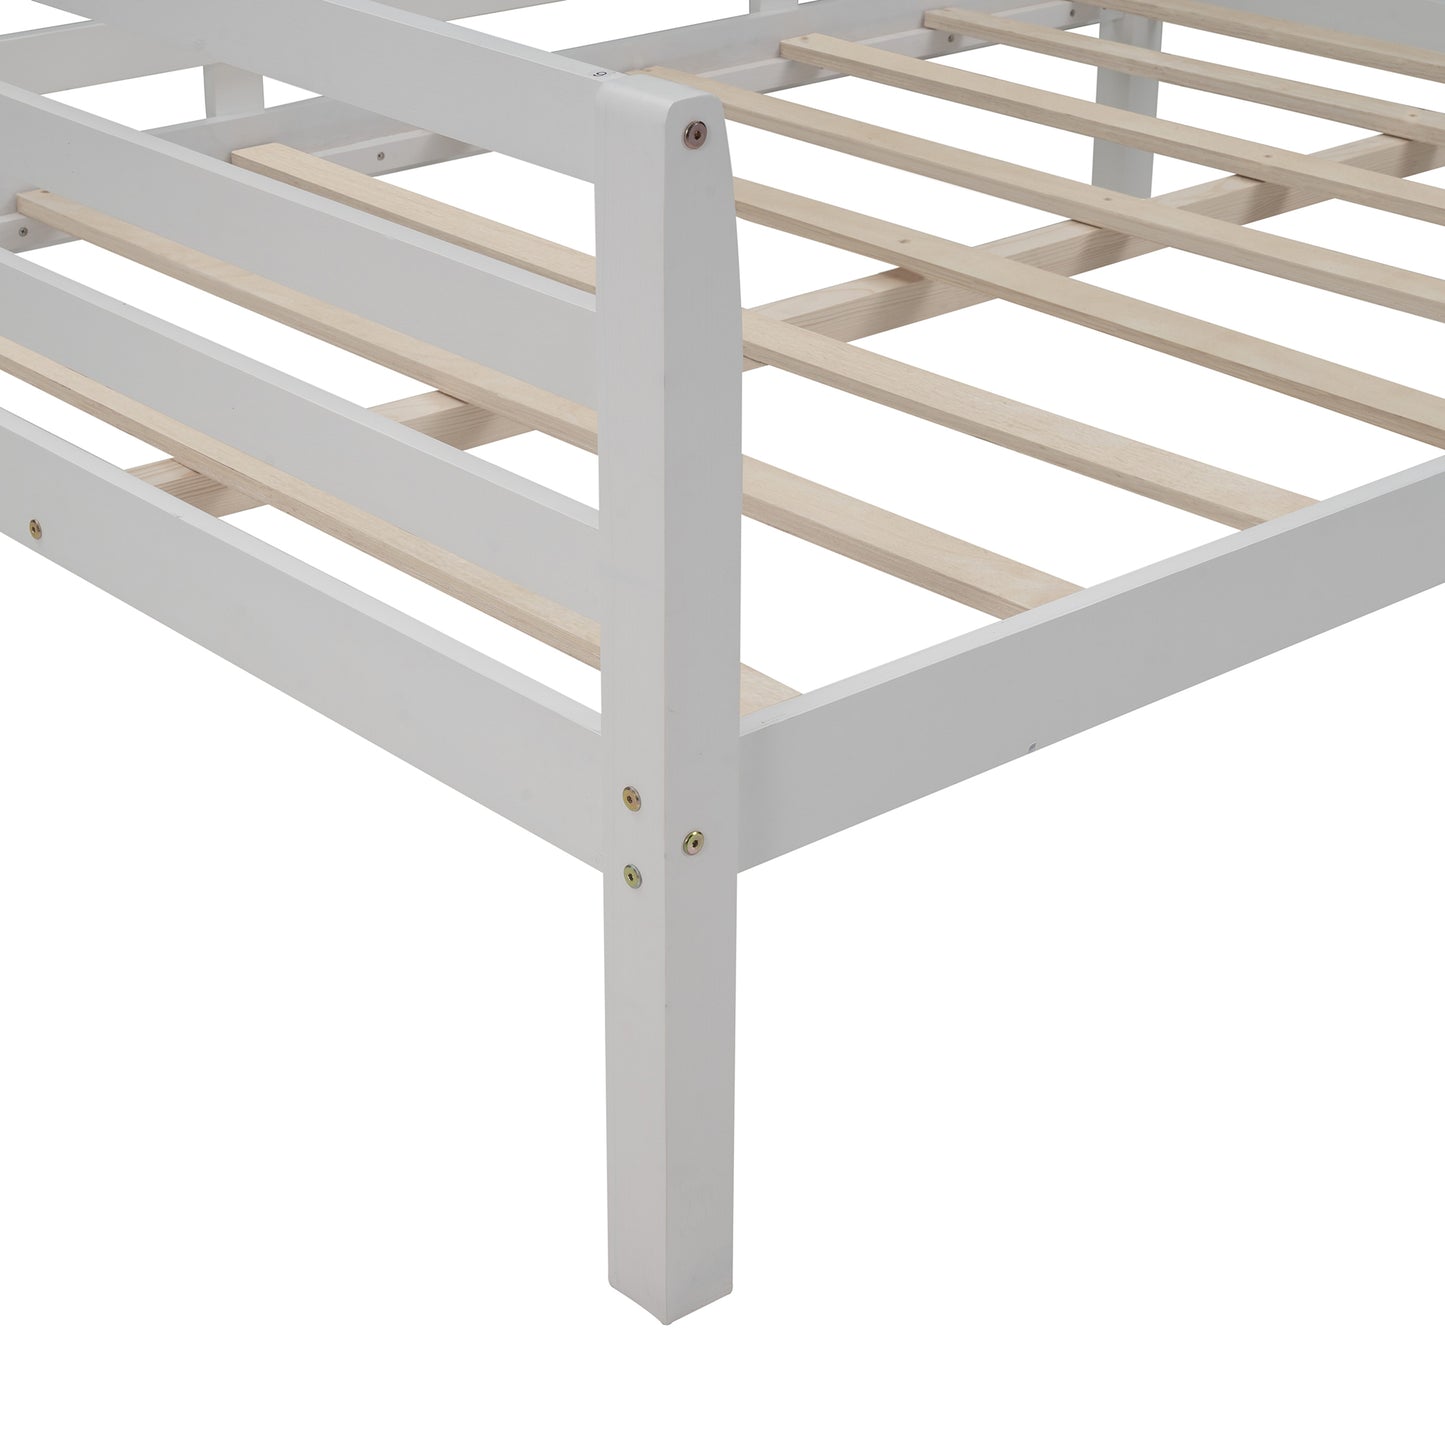 Wooden Full Size Daybed with Clean Lines, White